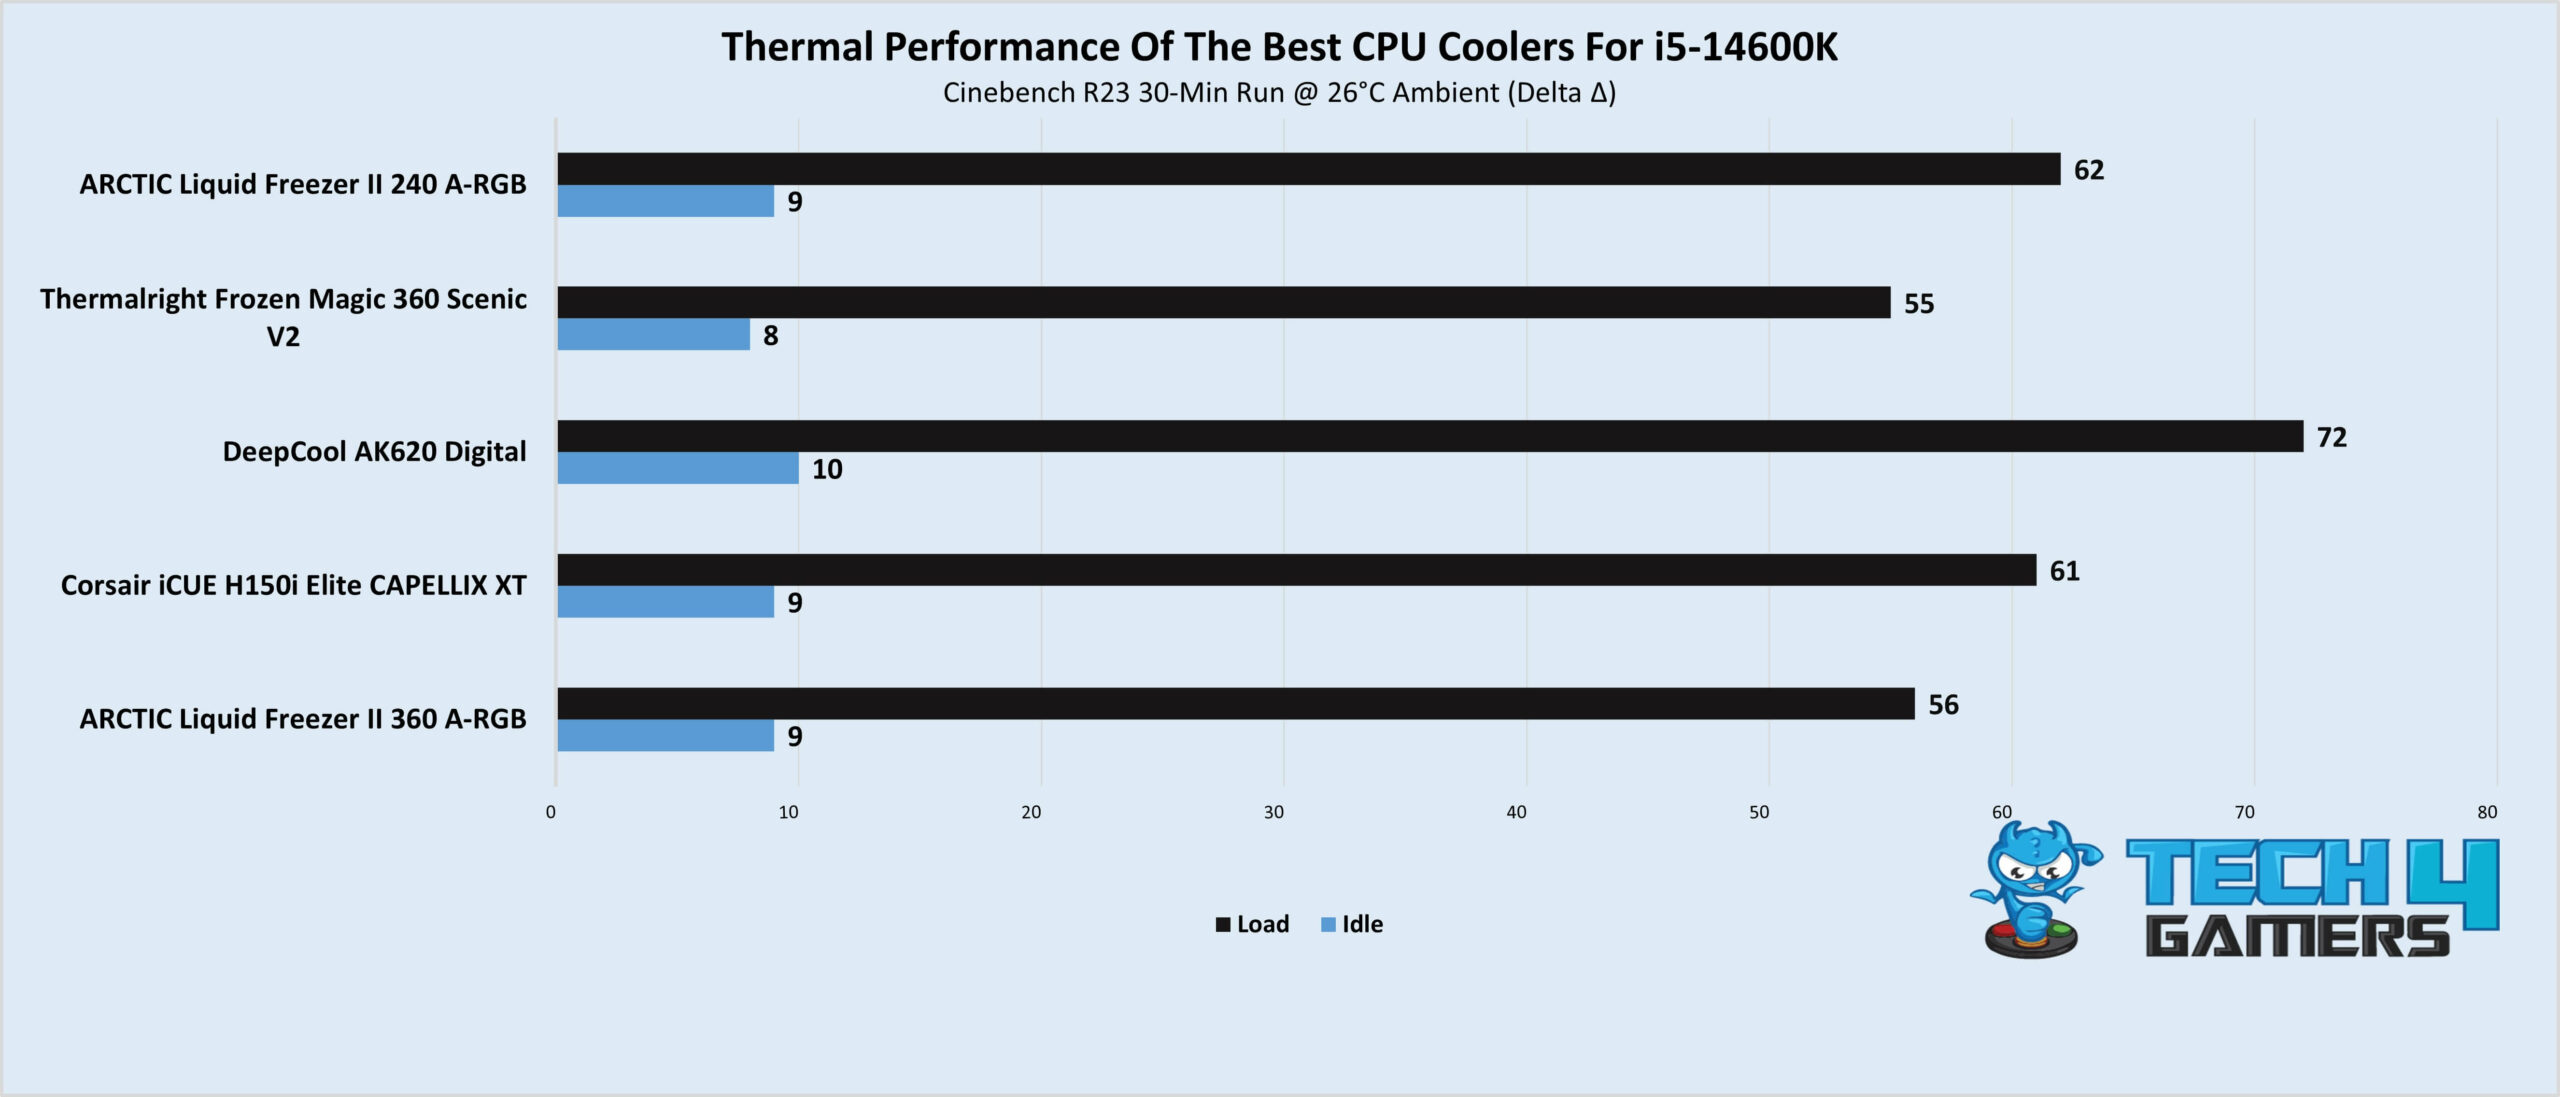 Thermal Performance Of The Best CPU Coolers For i5-14600K 